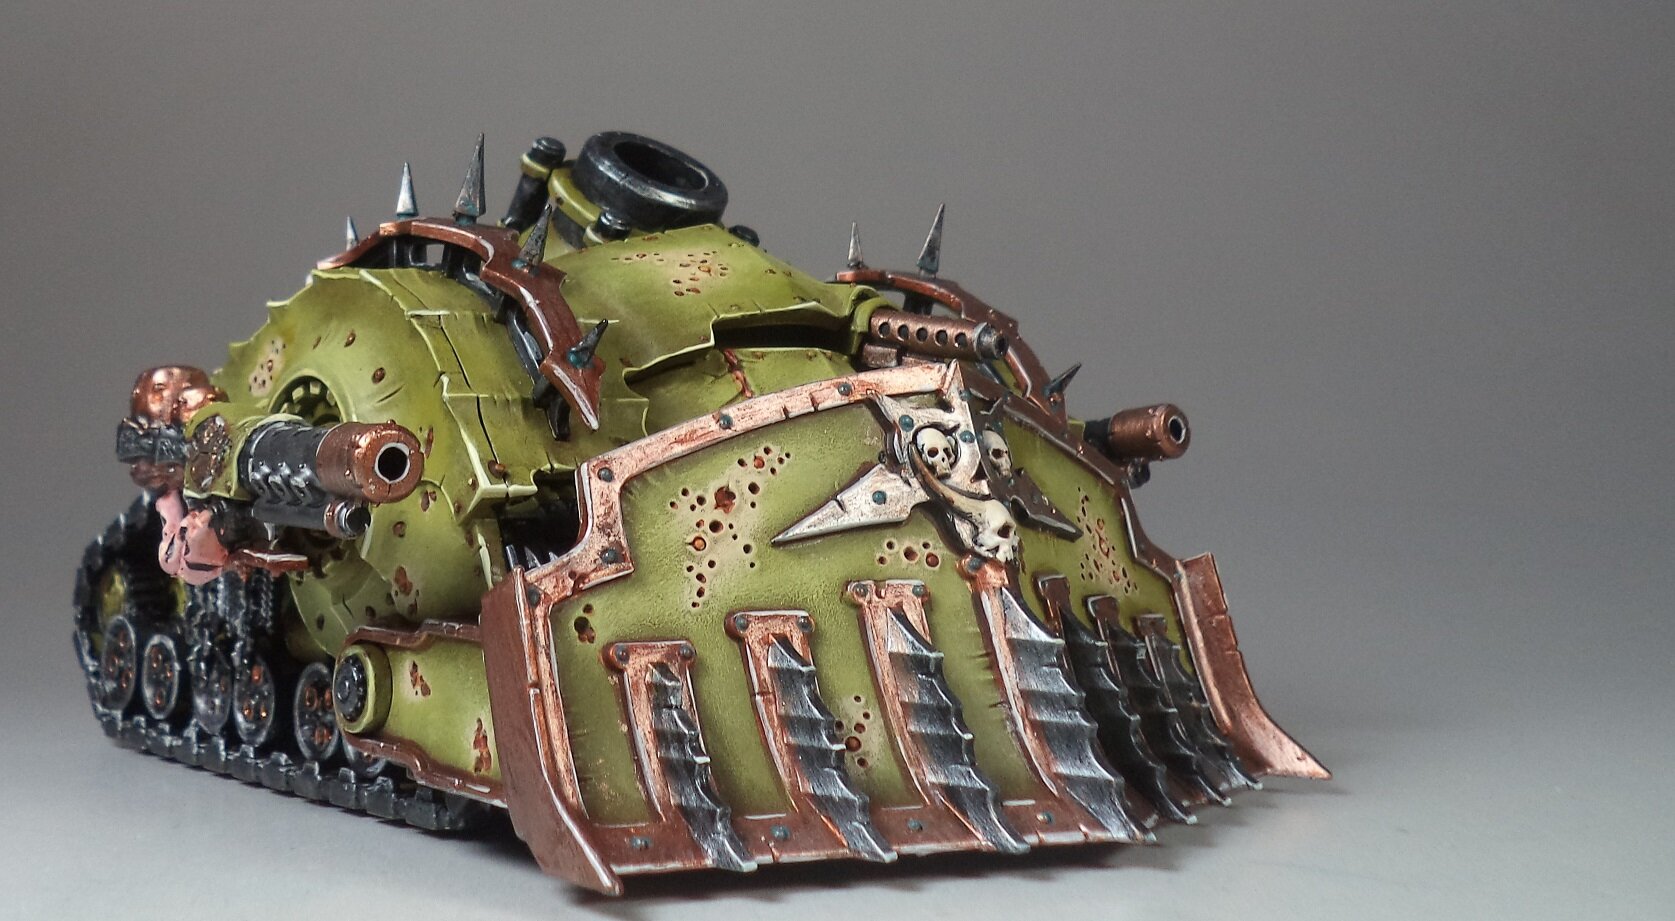 40k miniature painting service gaming painting painting commissions deathguard nurgle (9).JPG